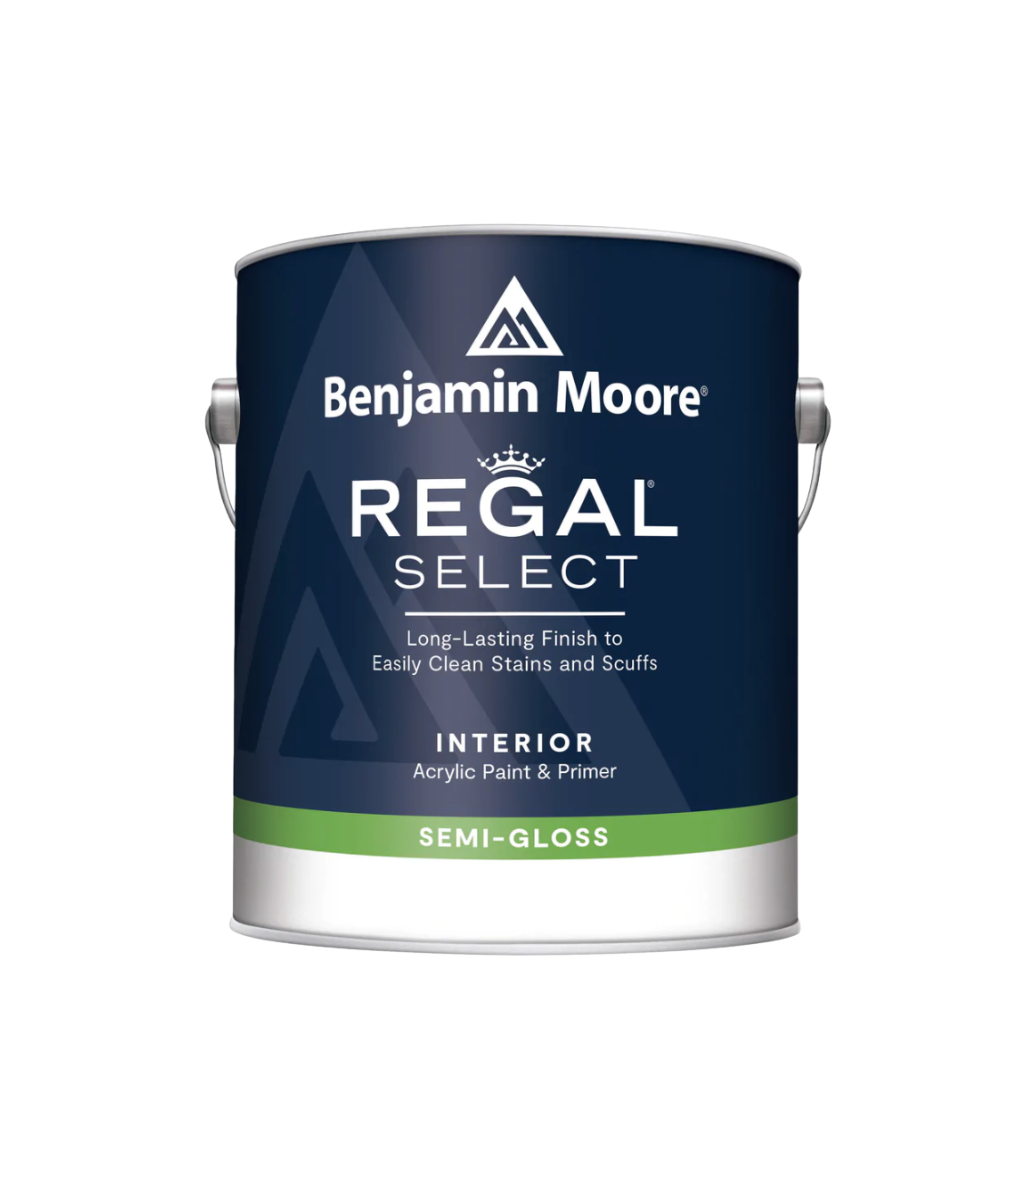 Benjamin Moore Regal Select Semi-Gloss Paint available at JC Licht.